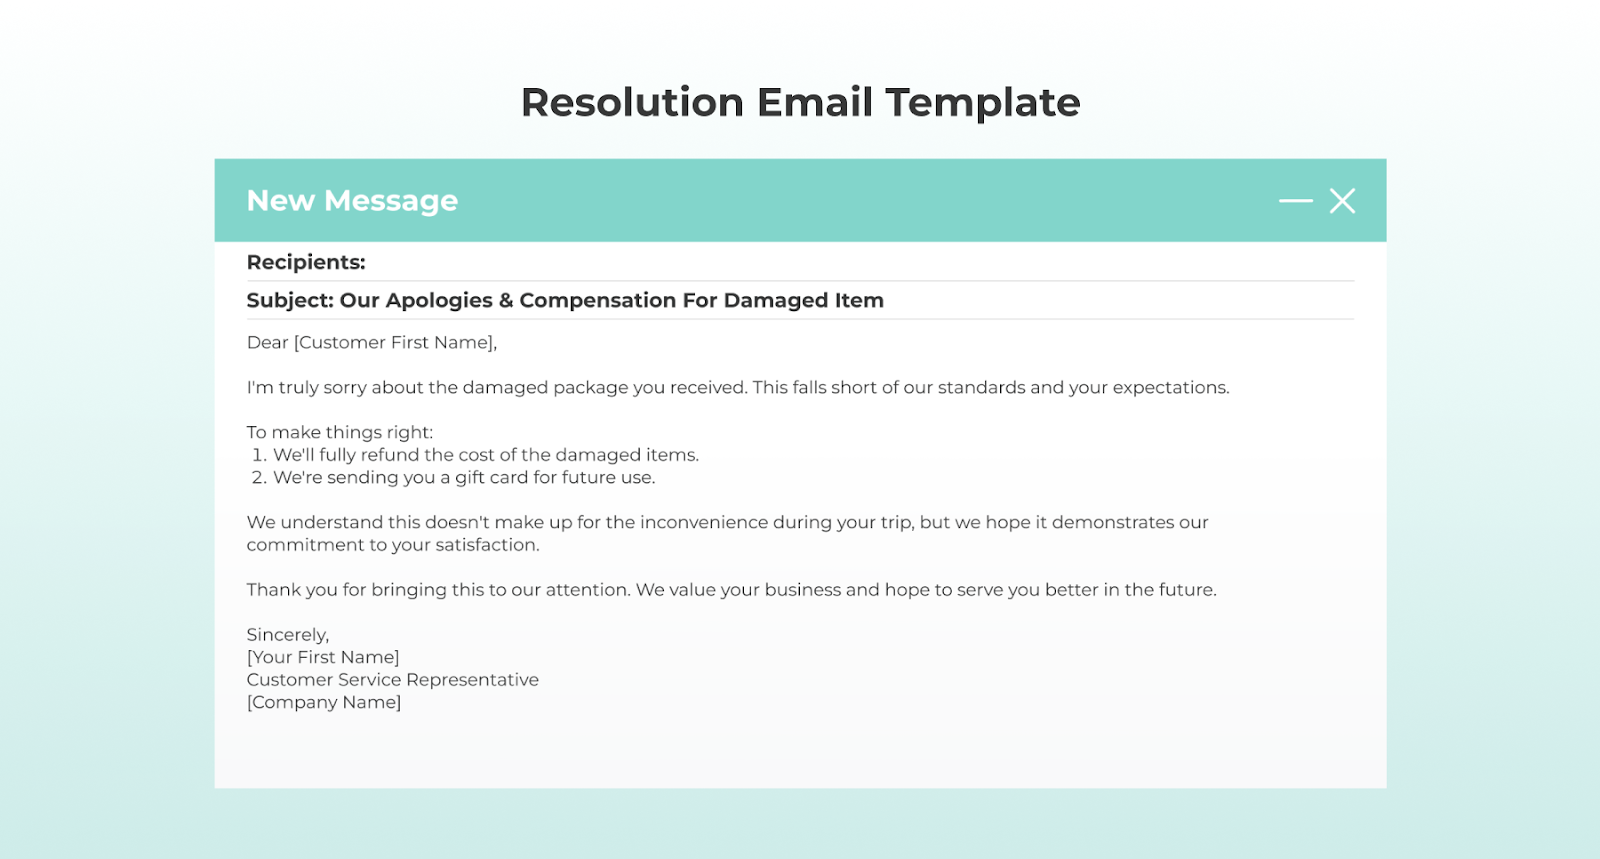 Resolution Email Template